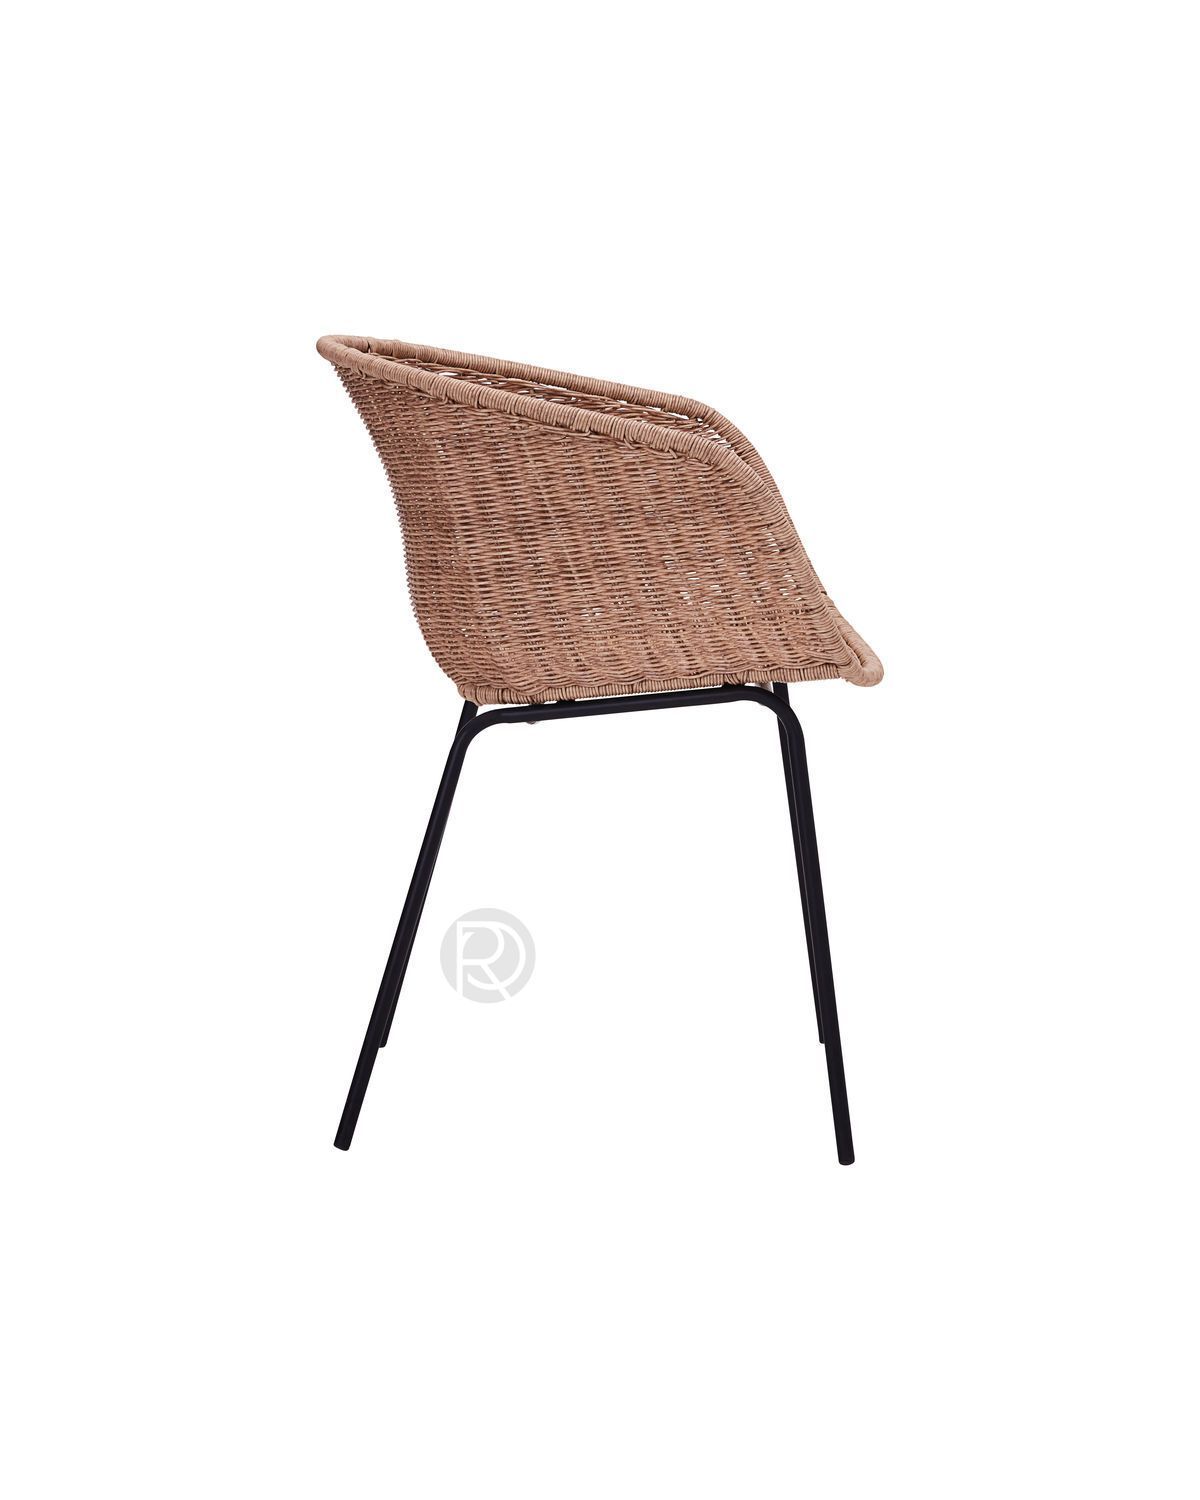 HAPUR CIRCLE Chair by House Doctor